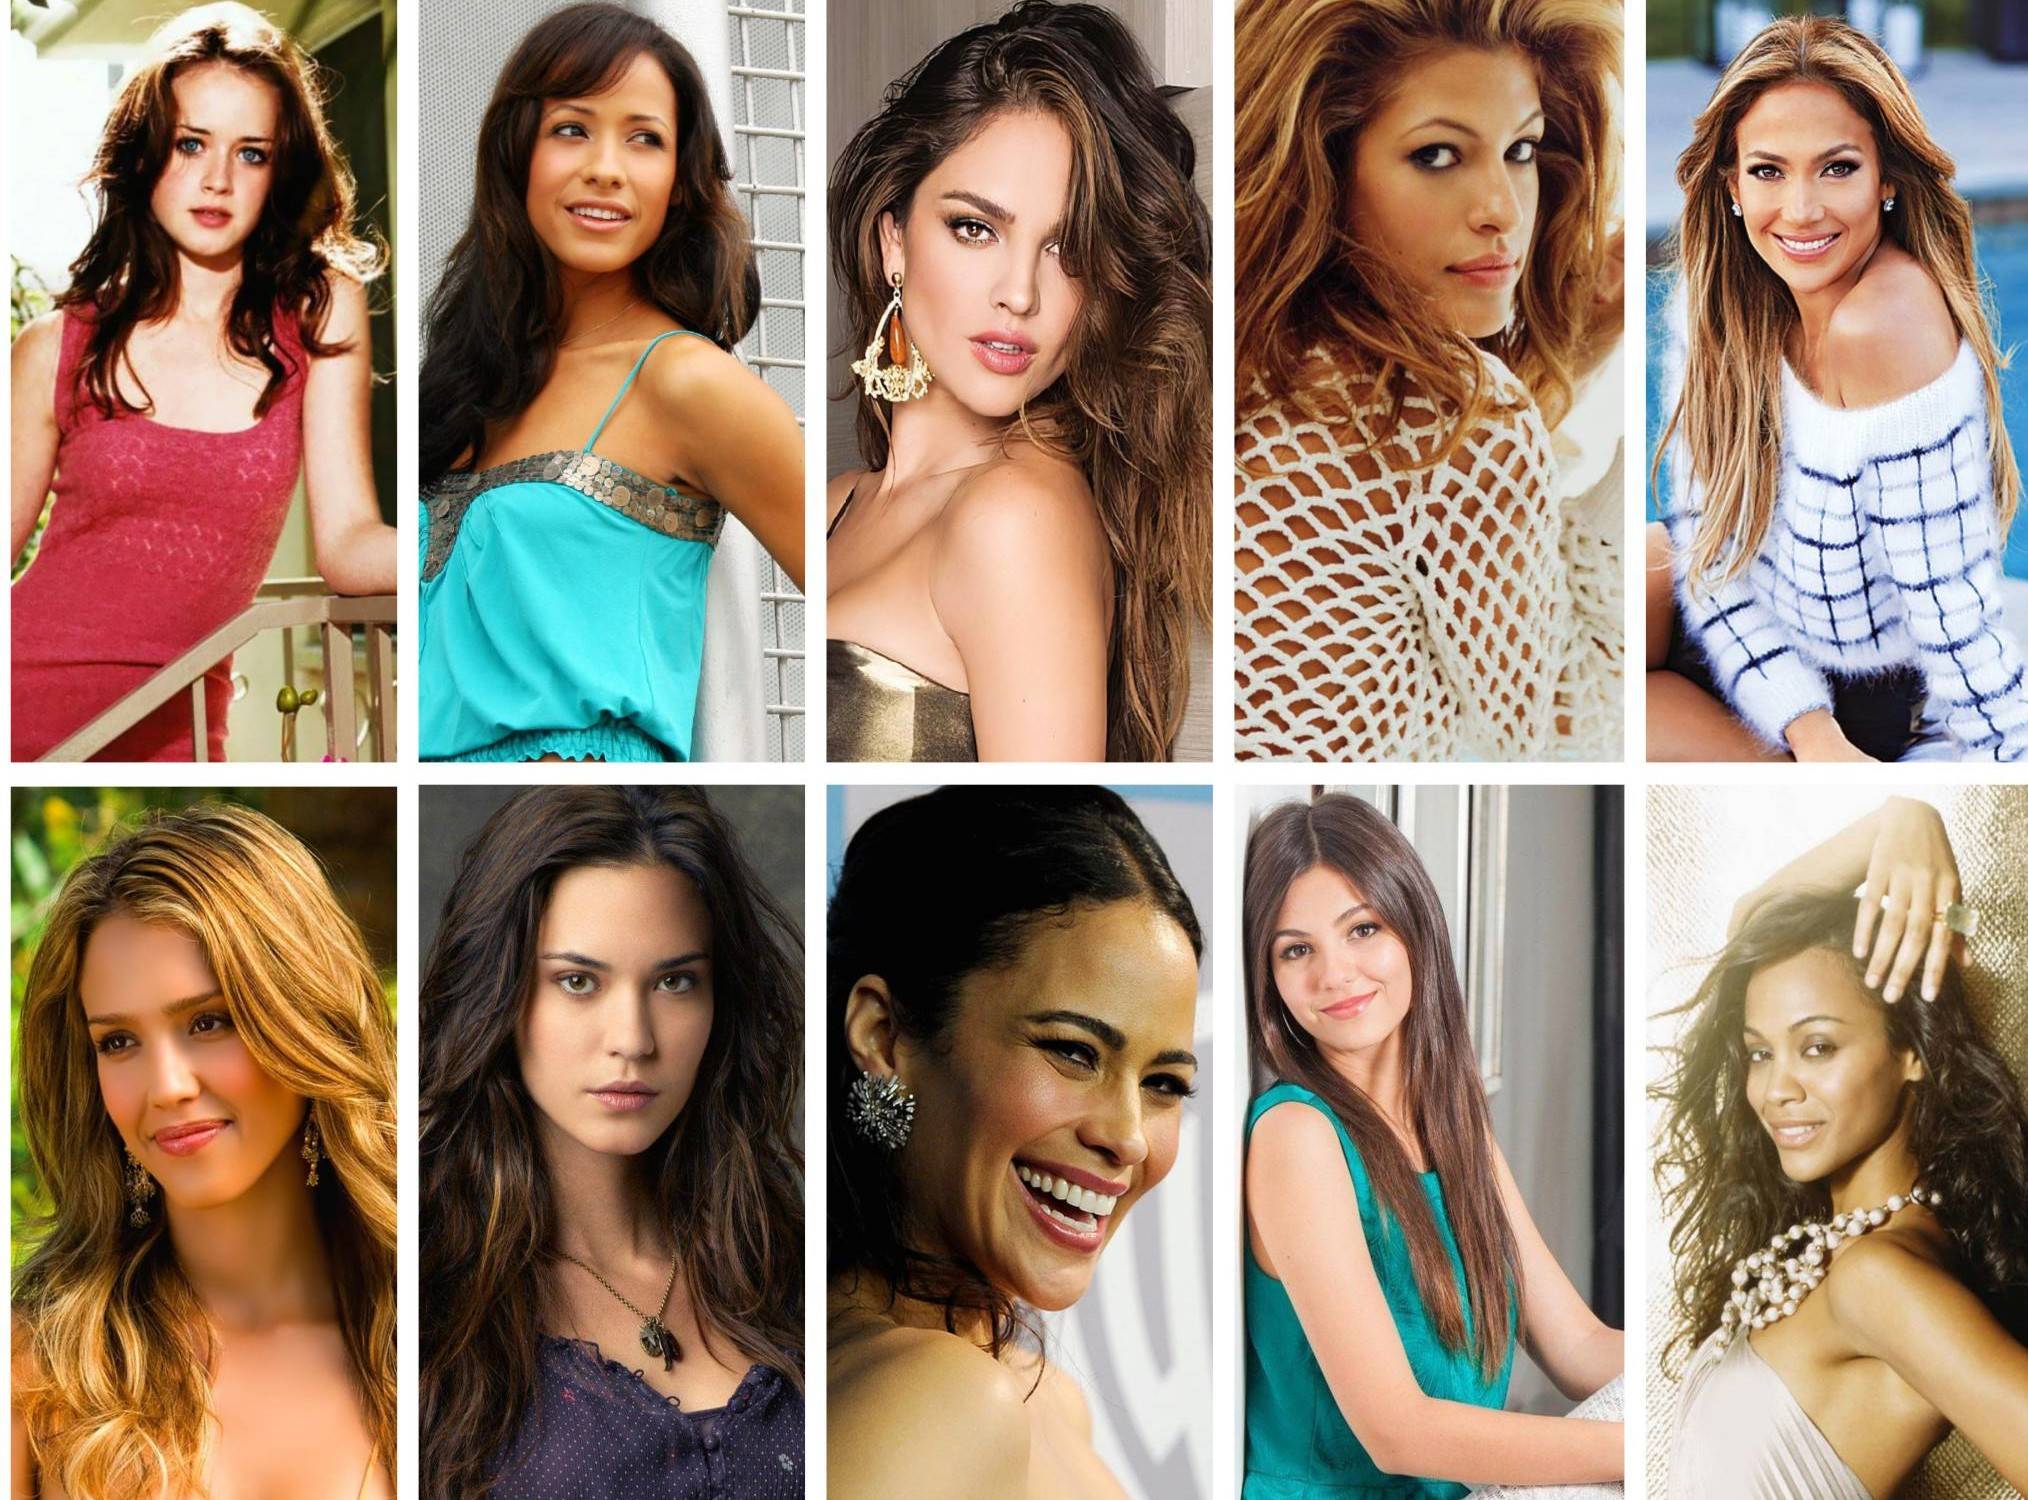 Top 18 Hottest Latina Actresses and Their Biography